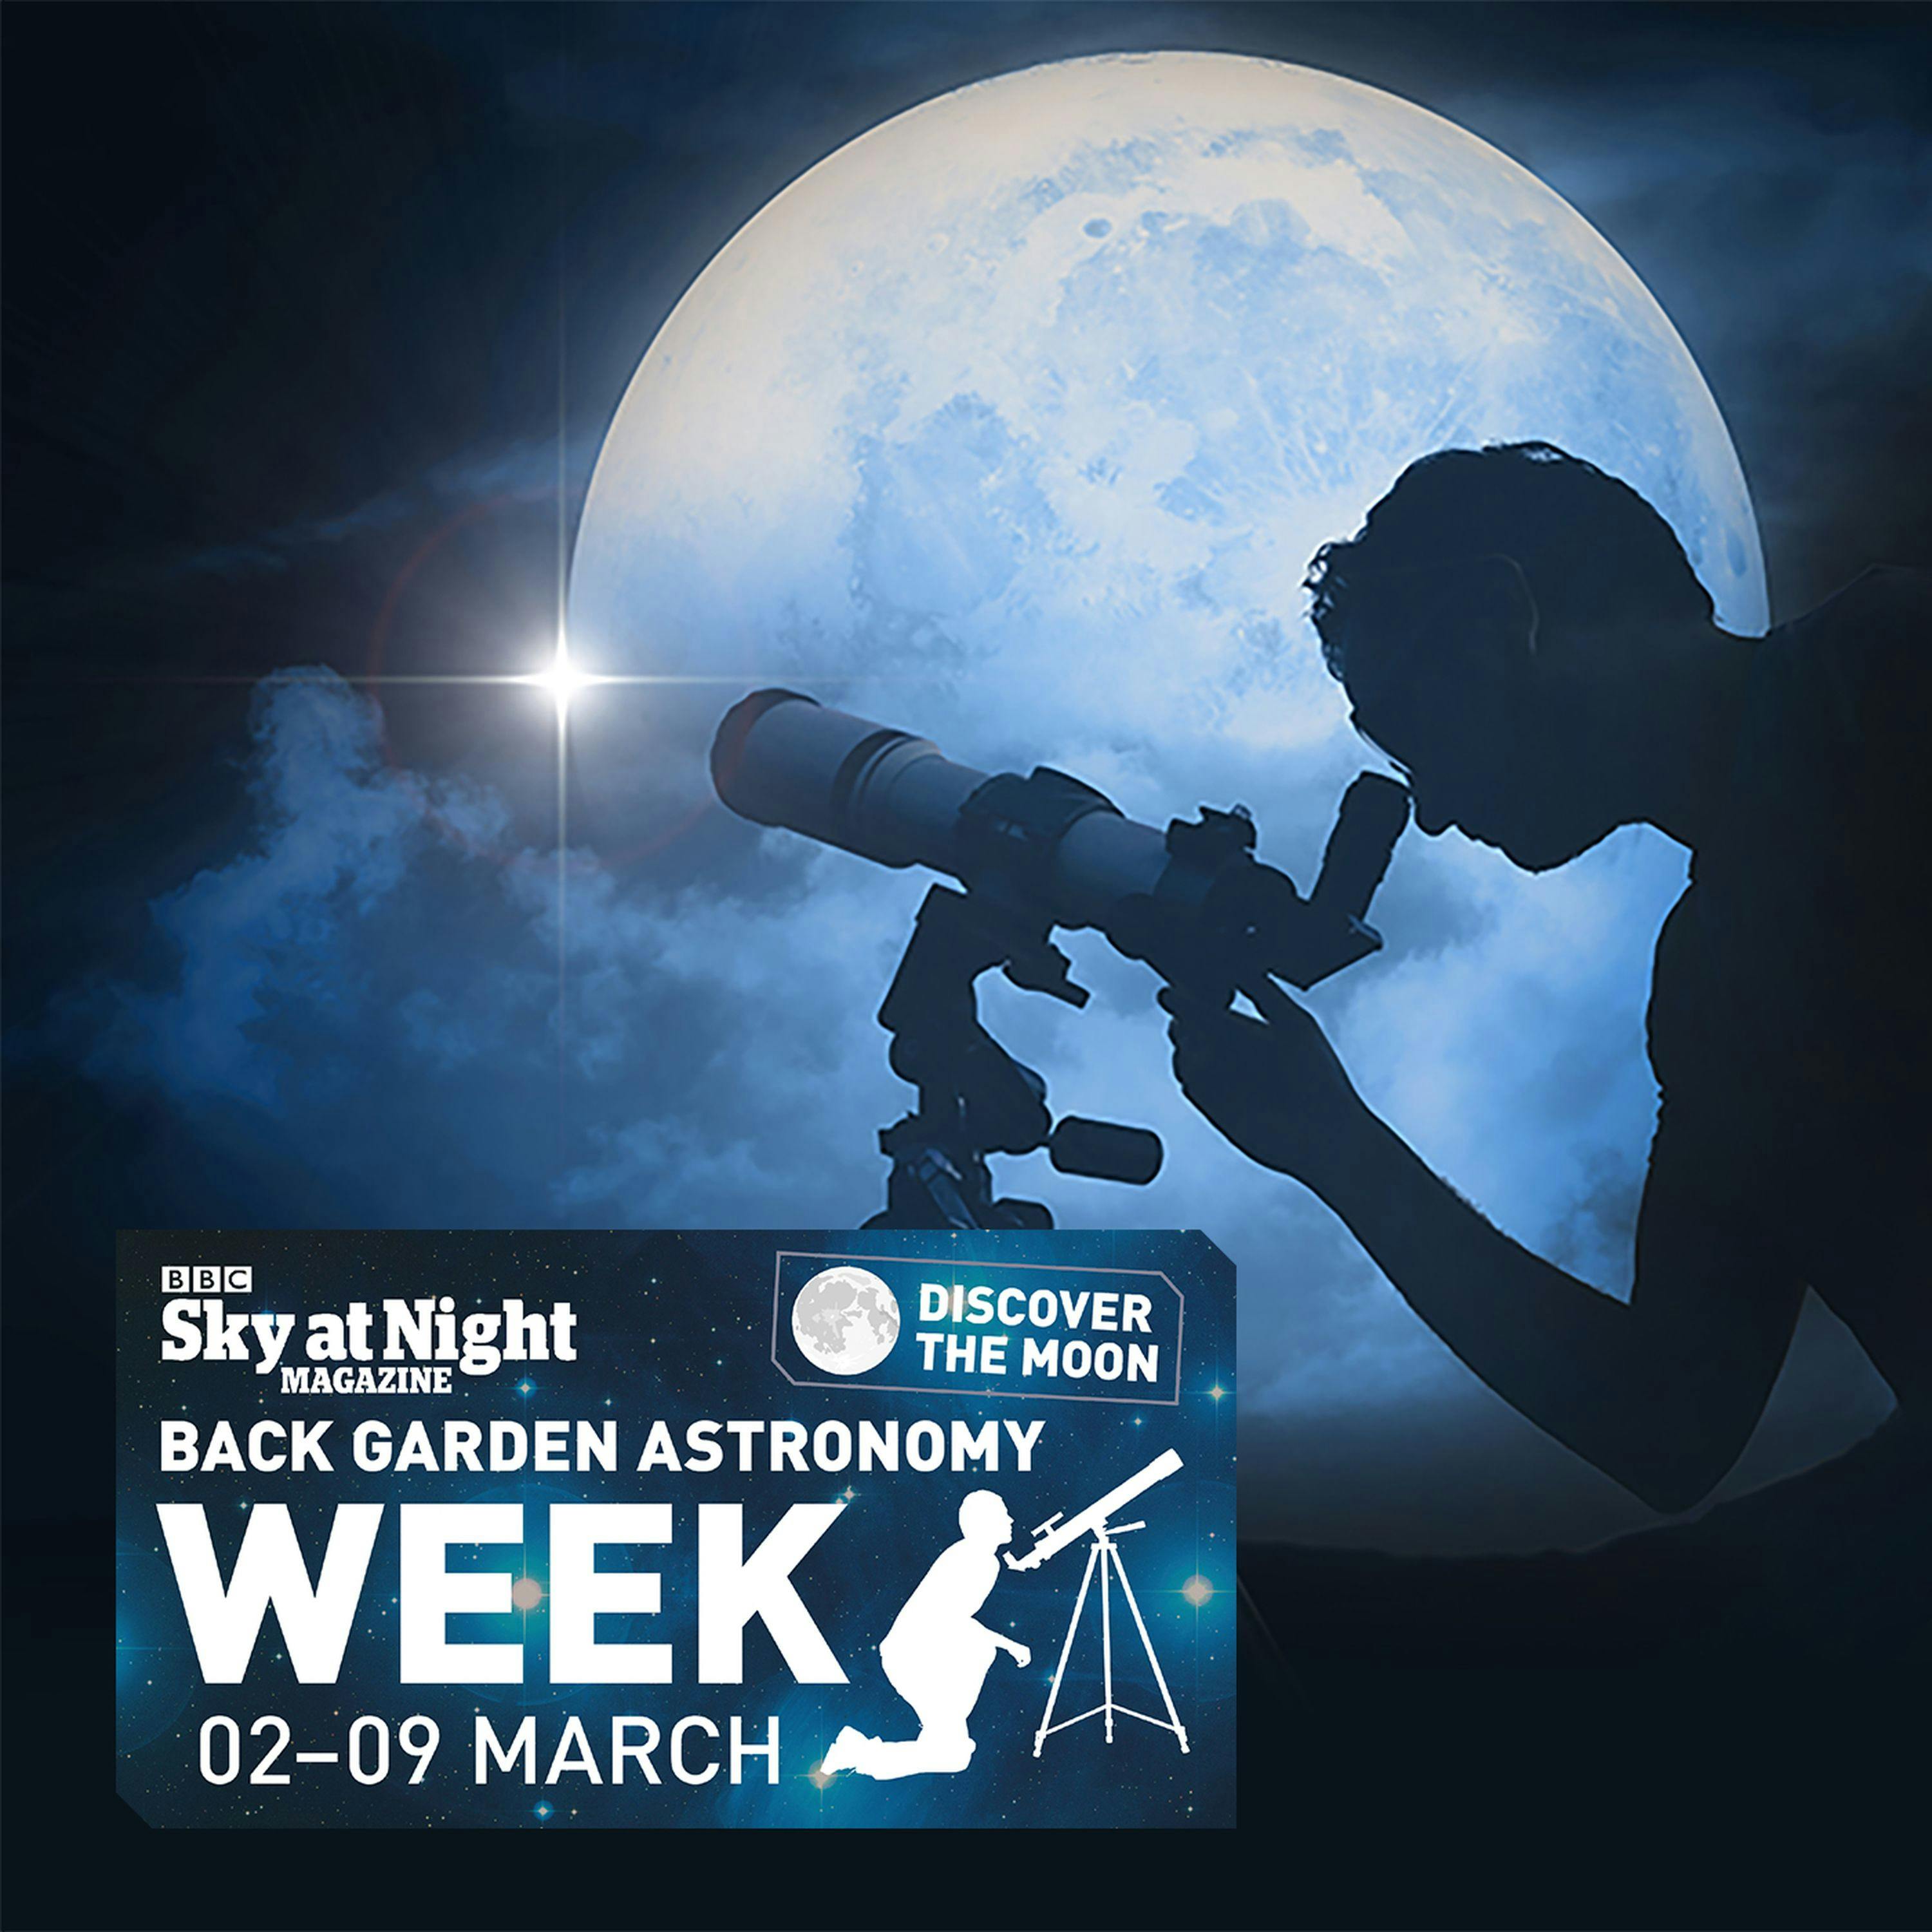 Day Three – Back Garden Astronomy Week: The Moon